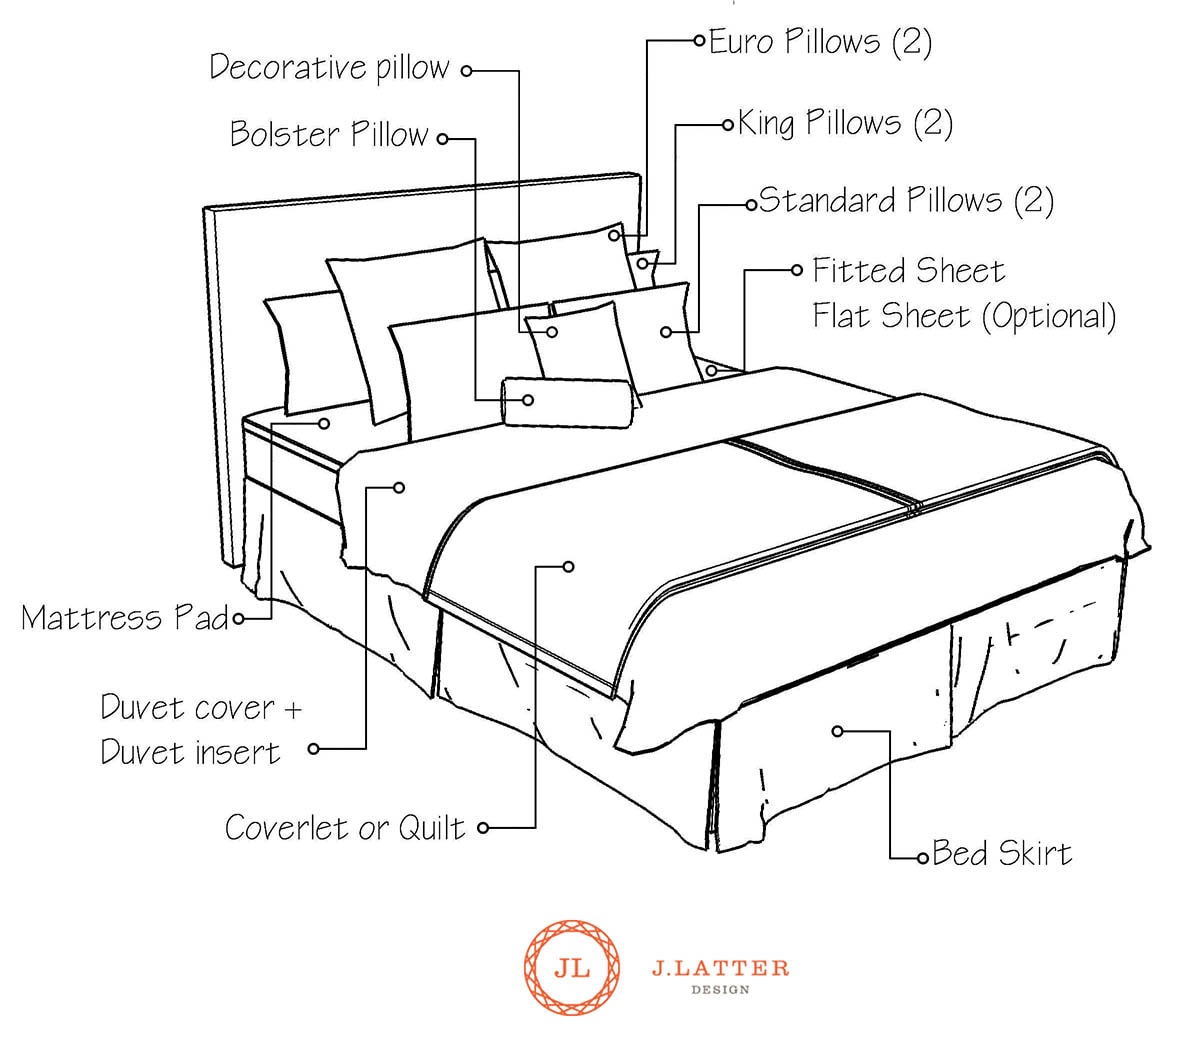 How To Dress A Bed The Basics J, How To Cover Bed Box Spring